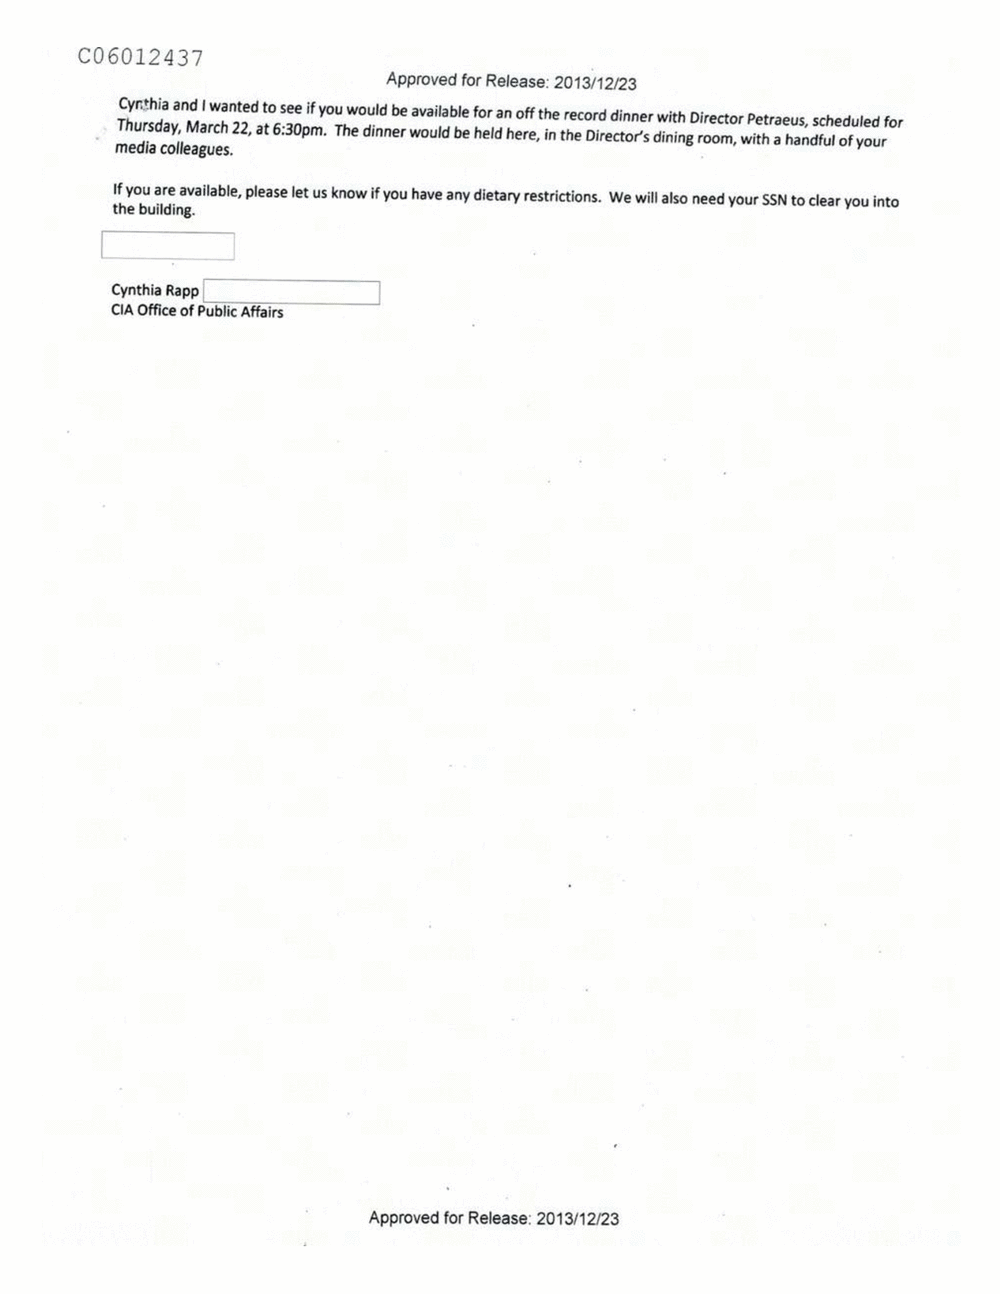 Page 19 from Email Correspondence Between Reporters and CIA Flacks